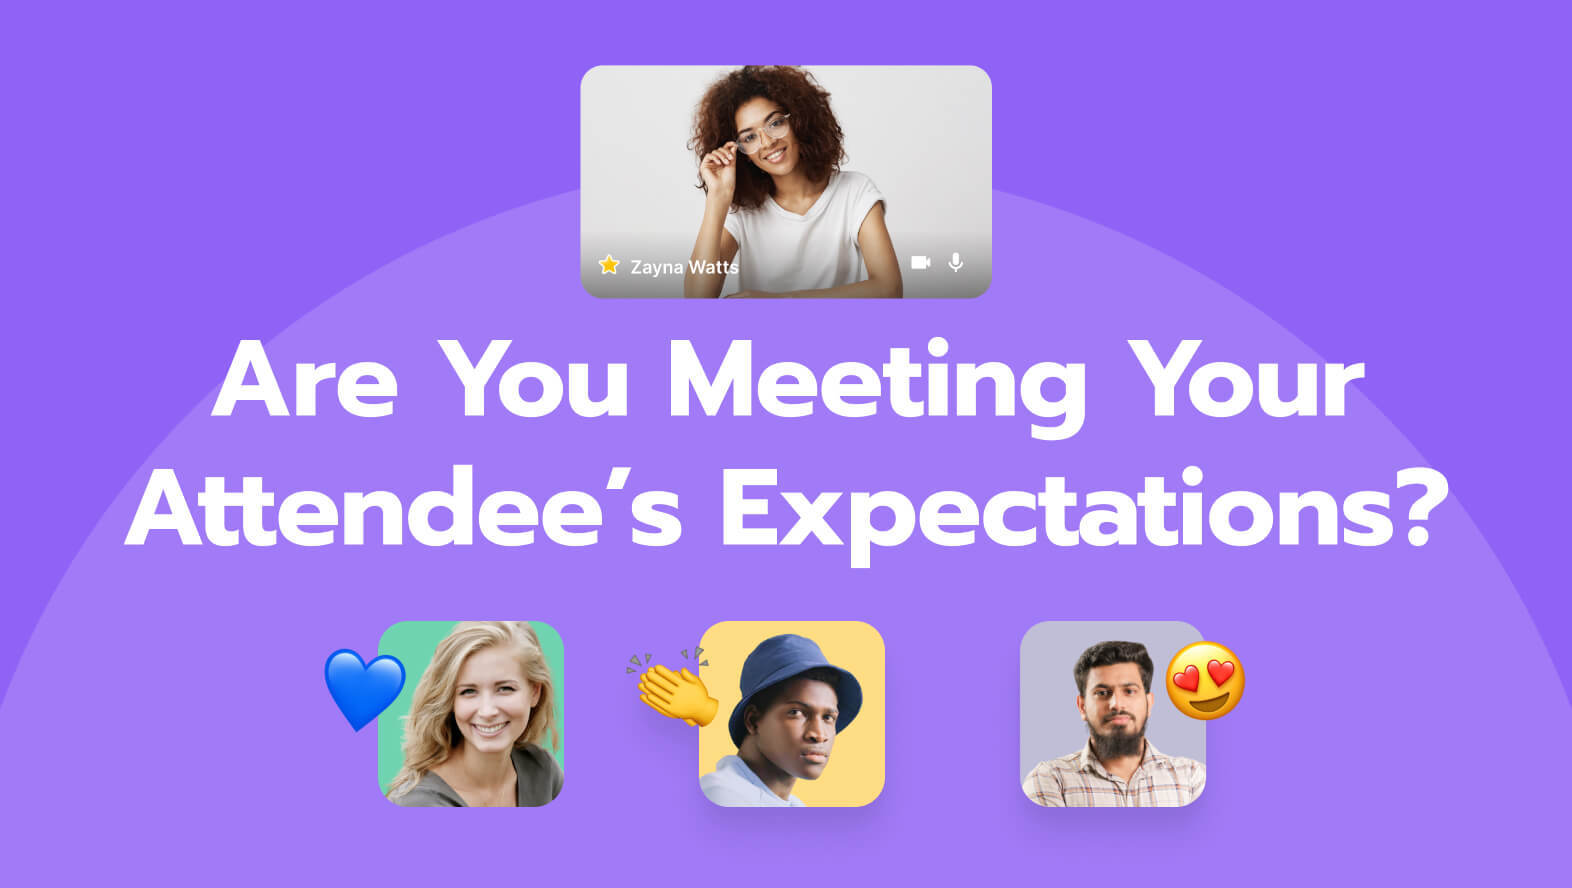 webinar attendee's expectations